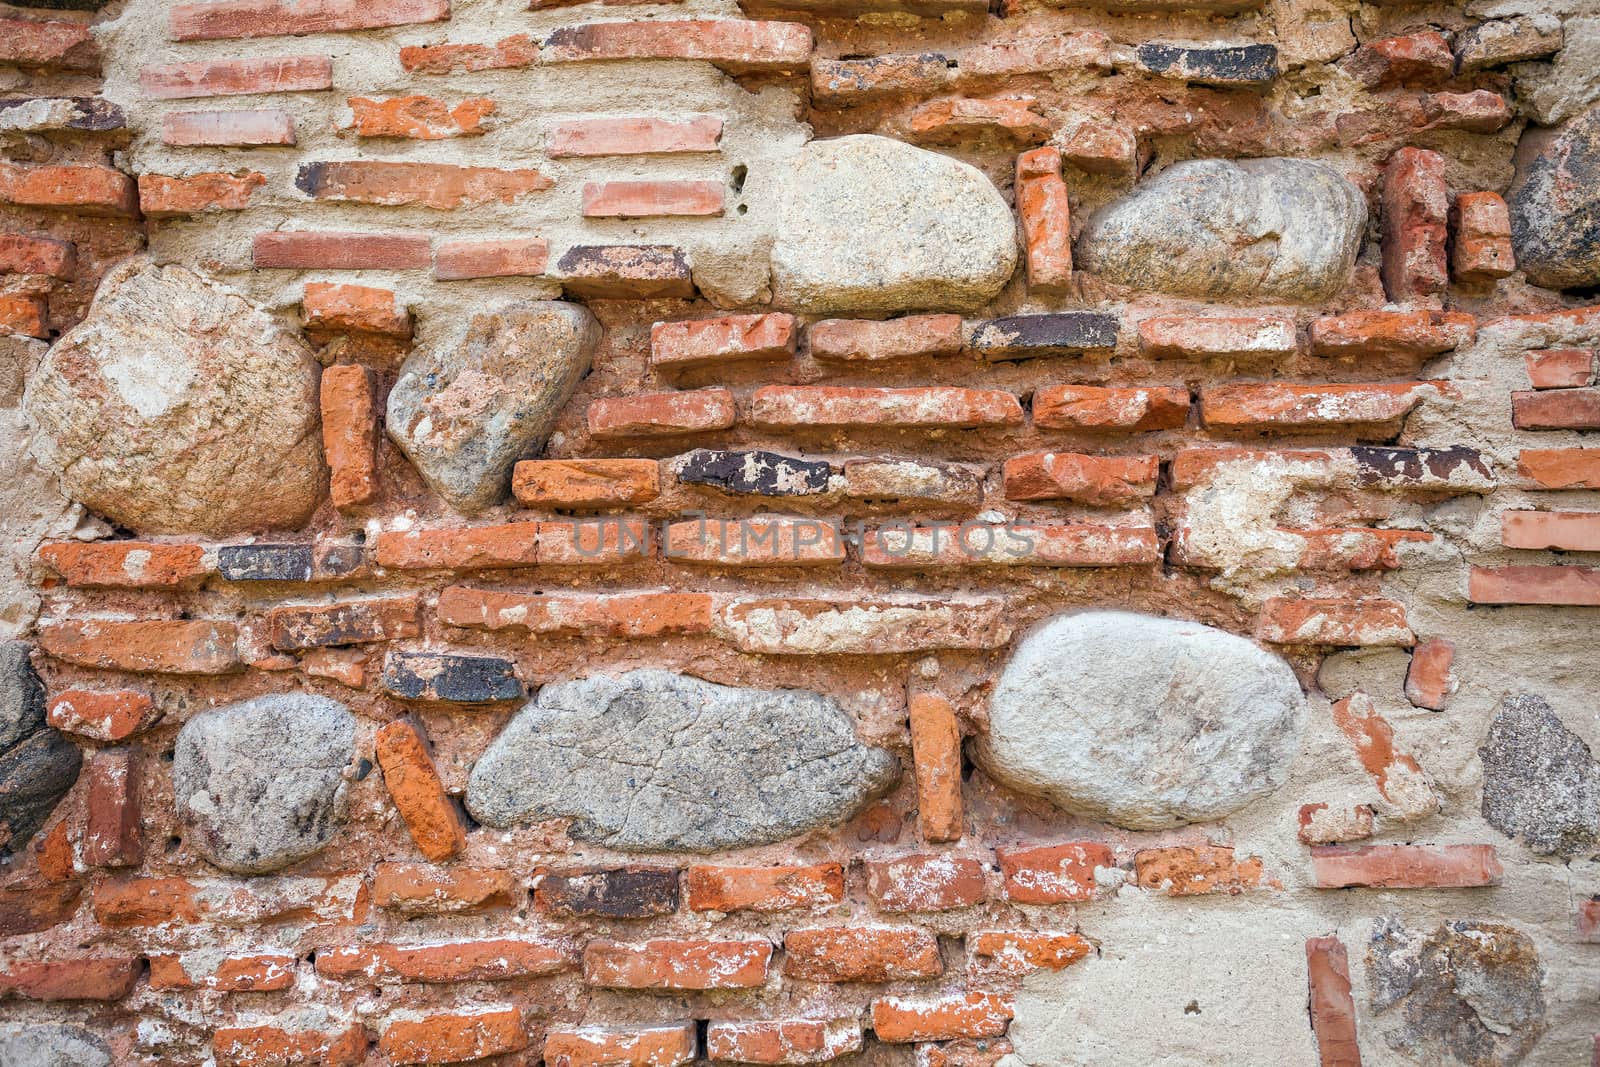 Rustic old wall background made of bricks and stones